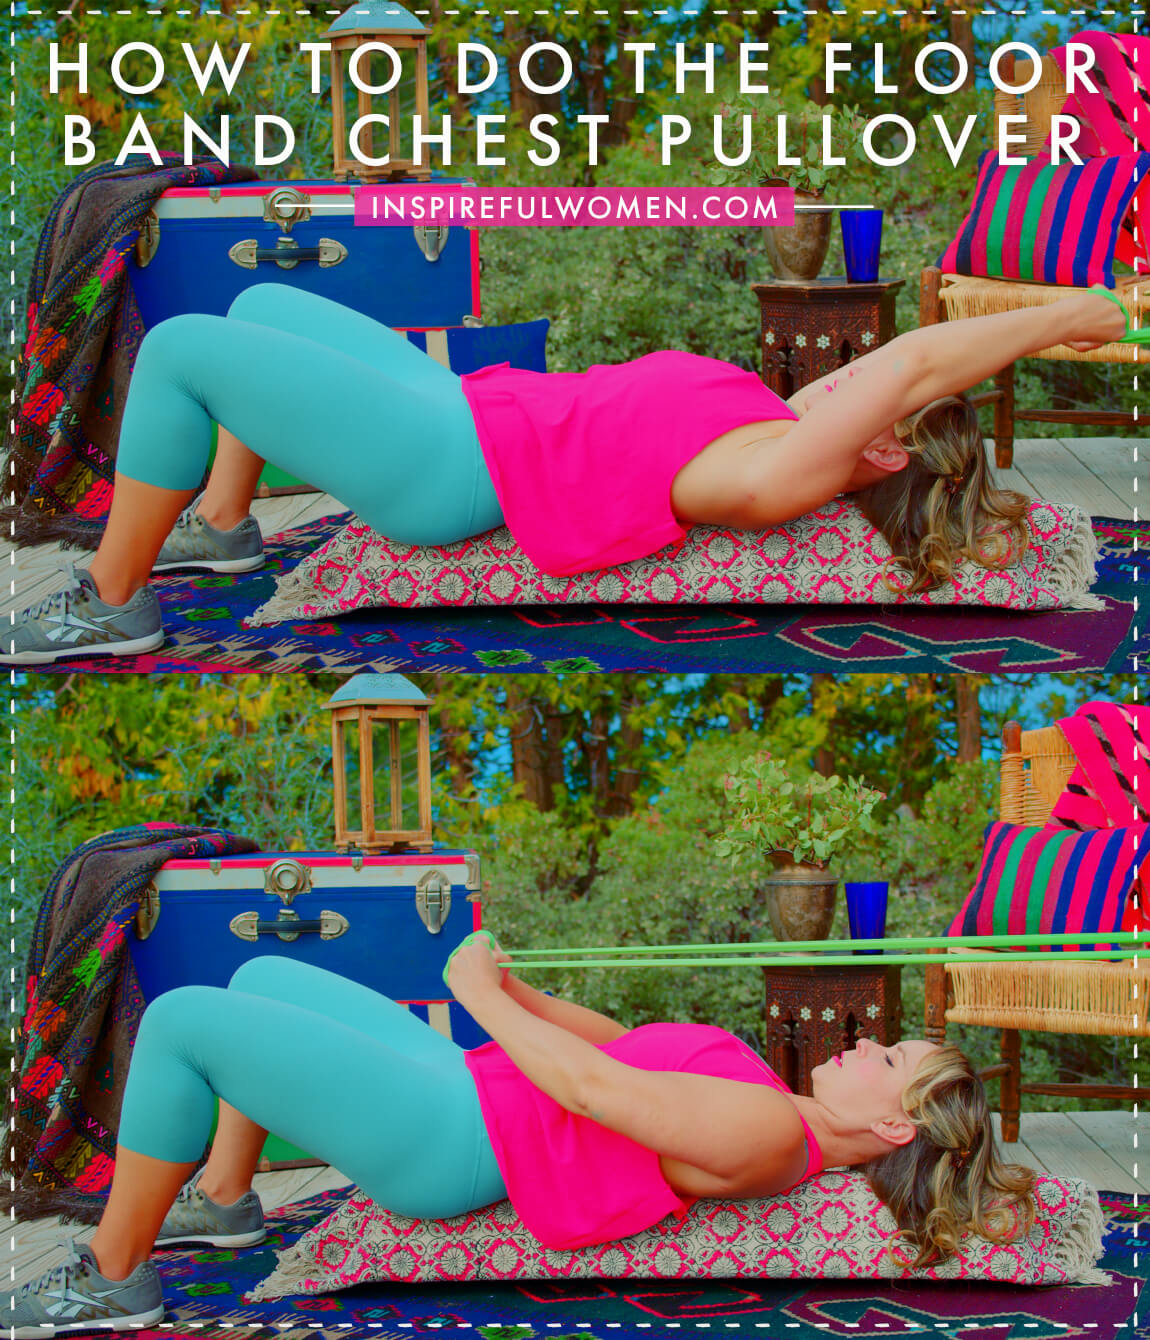 how-to-floor-banded-chest-pullovers-foam-roller-pec-lats-triceps-exercise-proper-form